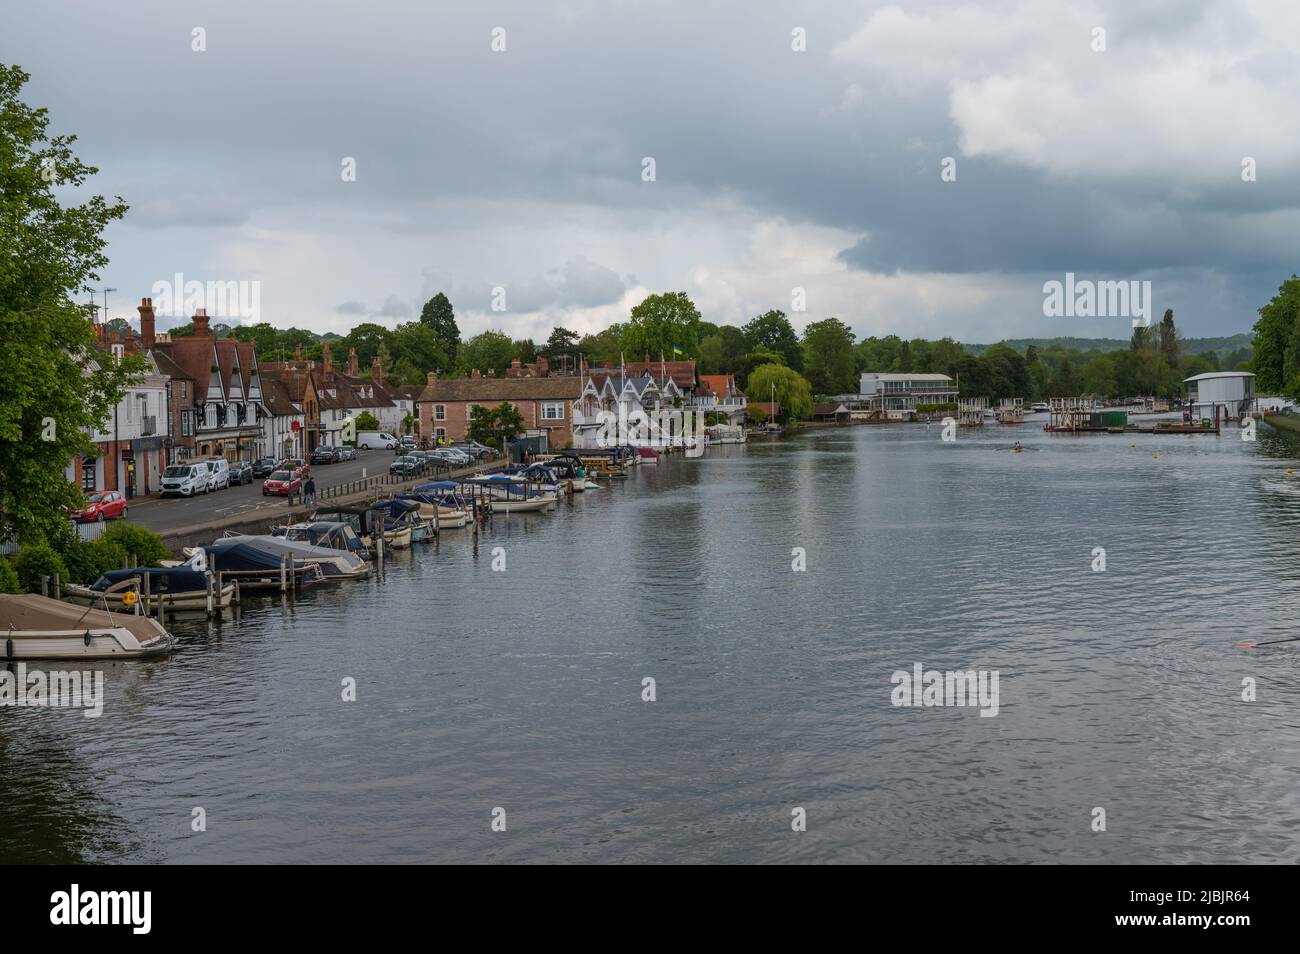 View along the River Thames from Henley Bridge on a dull, cloudy day. Rowers on the water in double scull. Henley on Thames, Oxfordshire, England, UK Stock Photo